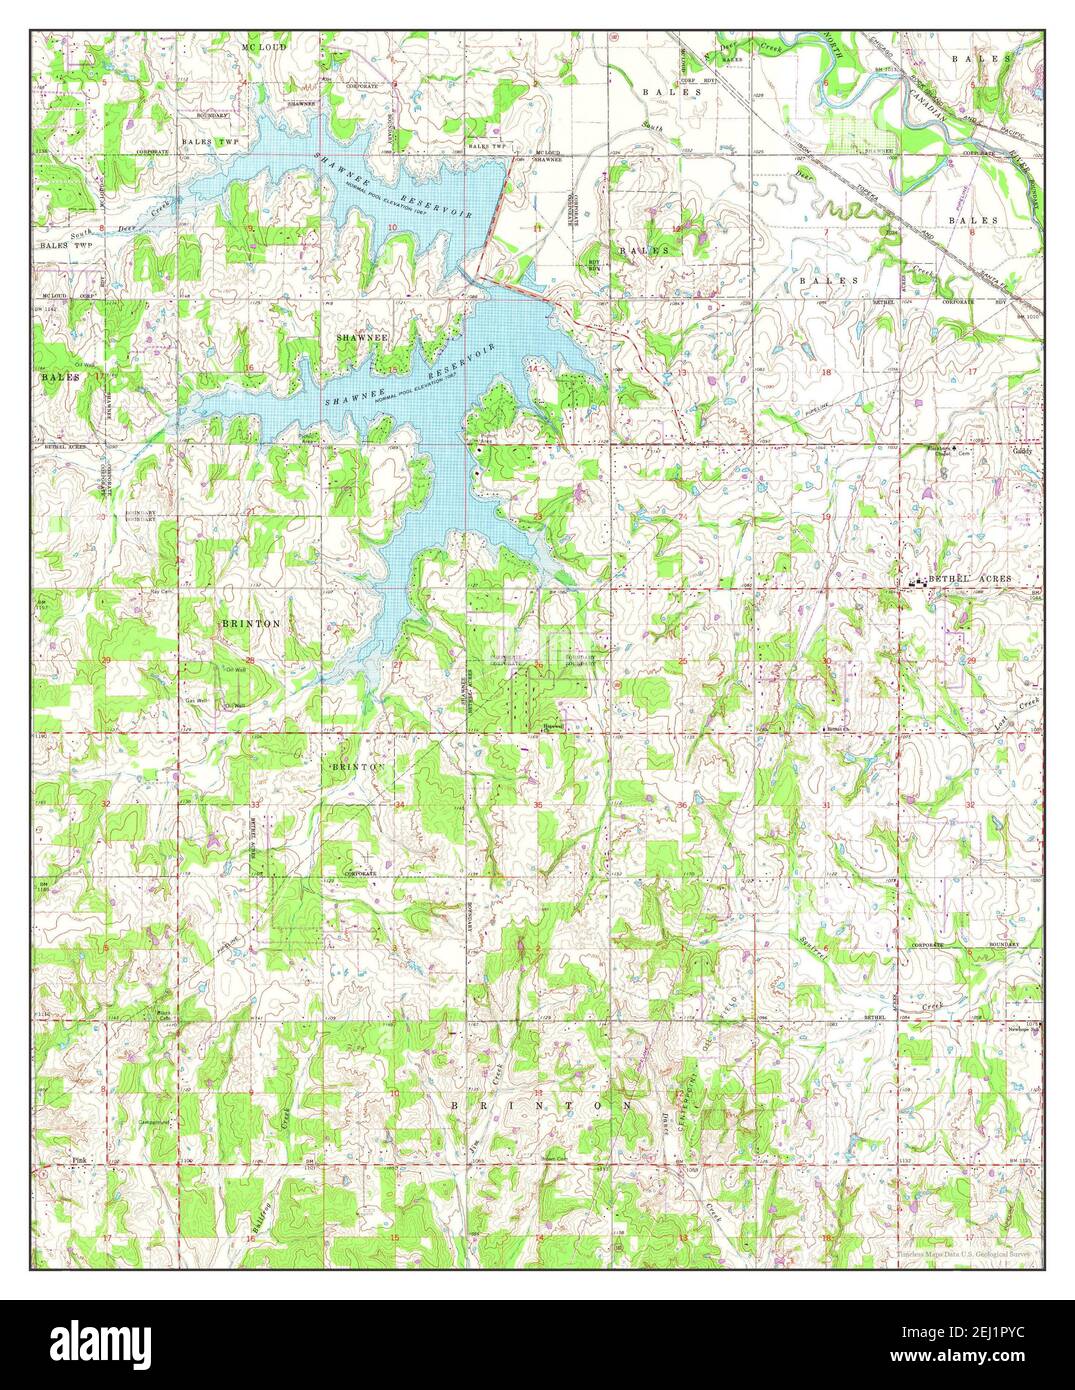 Shawnee Reservoir, Oklahoma, map 1966, 1:24000, United States of America by Timeless Maps, data U.S. Geological Survey Foto Stock